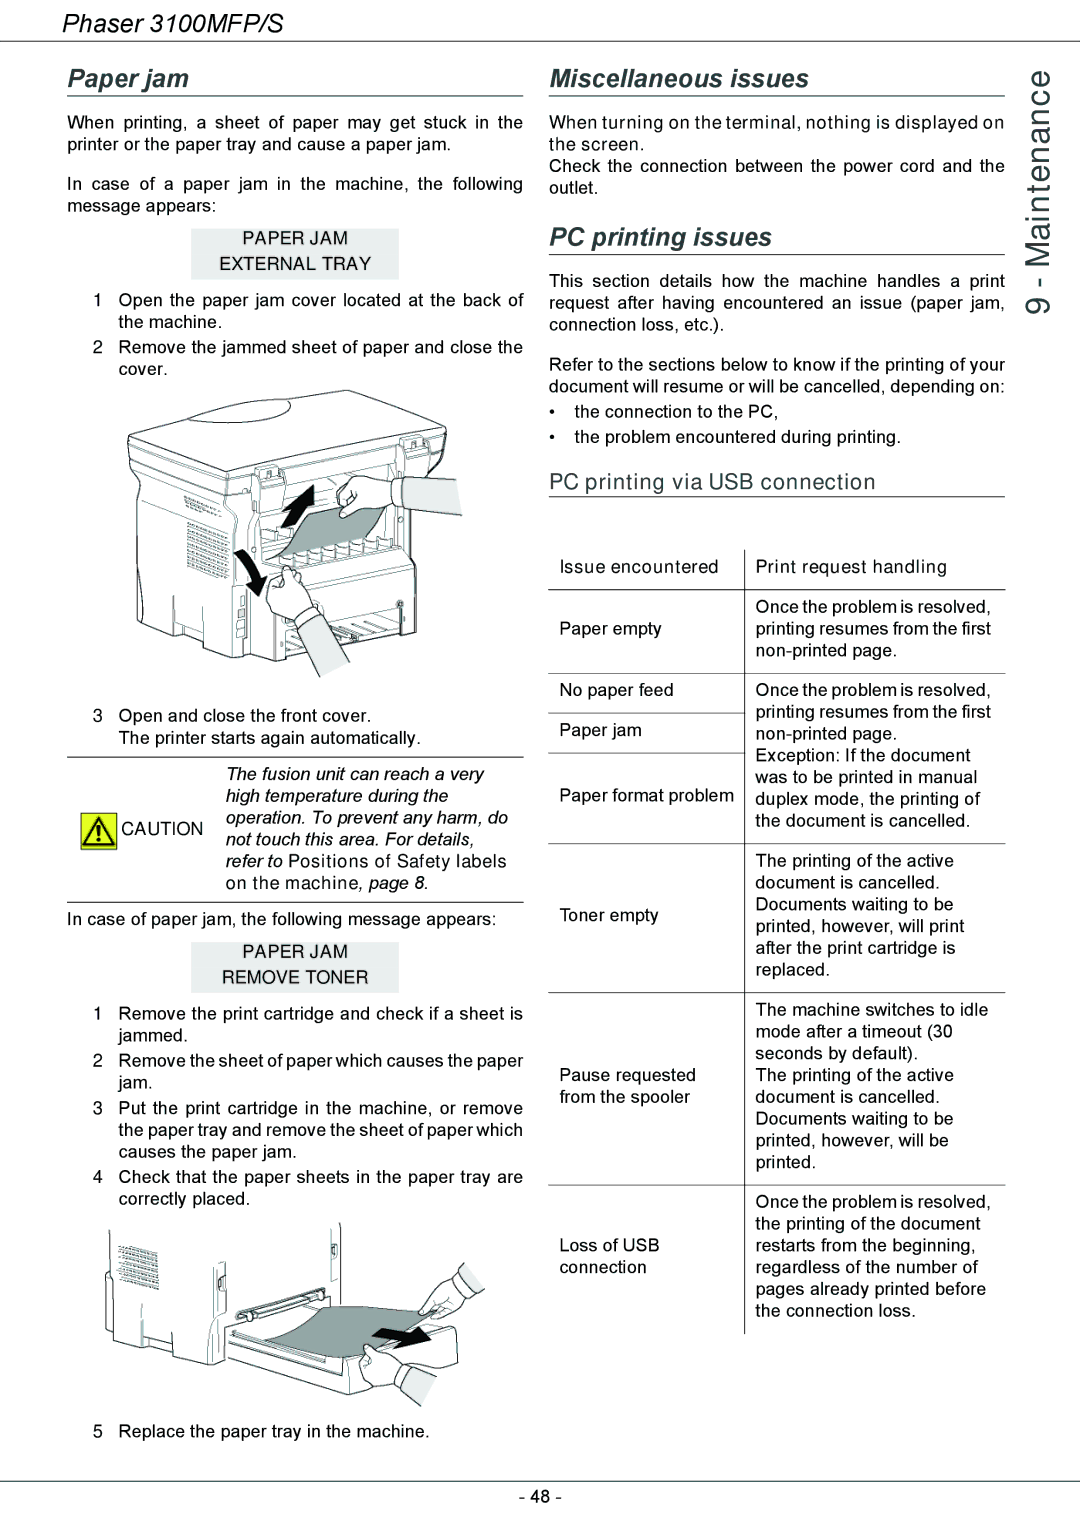 Xerox 3100MFP/S manual Maintenance, Paper jam, Miscellaneous issues, PC printing issues, PC printing via USB connection 